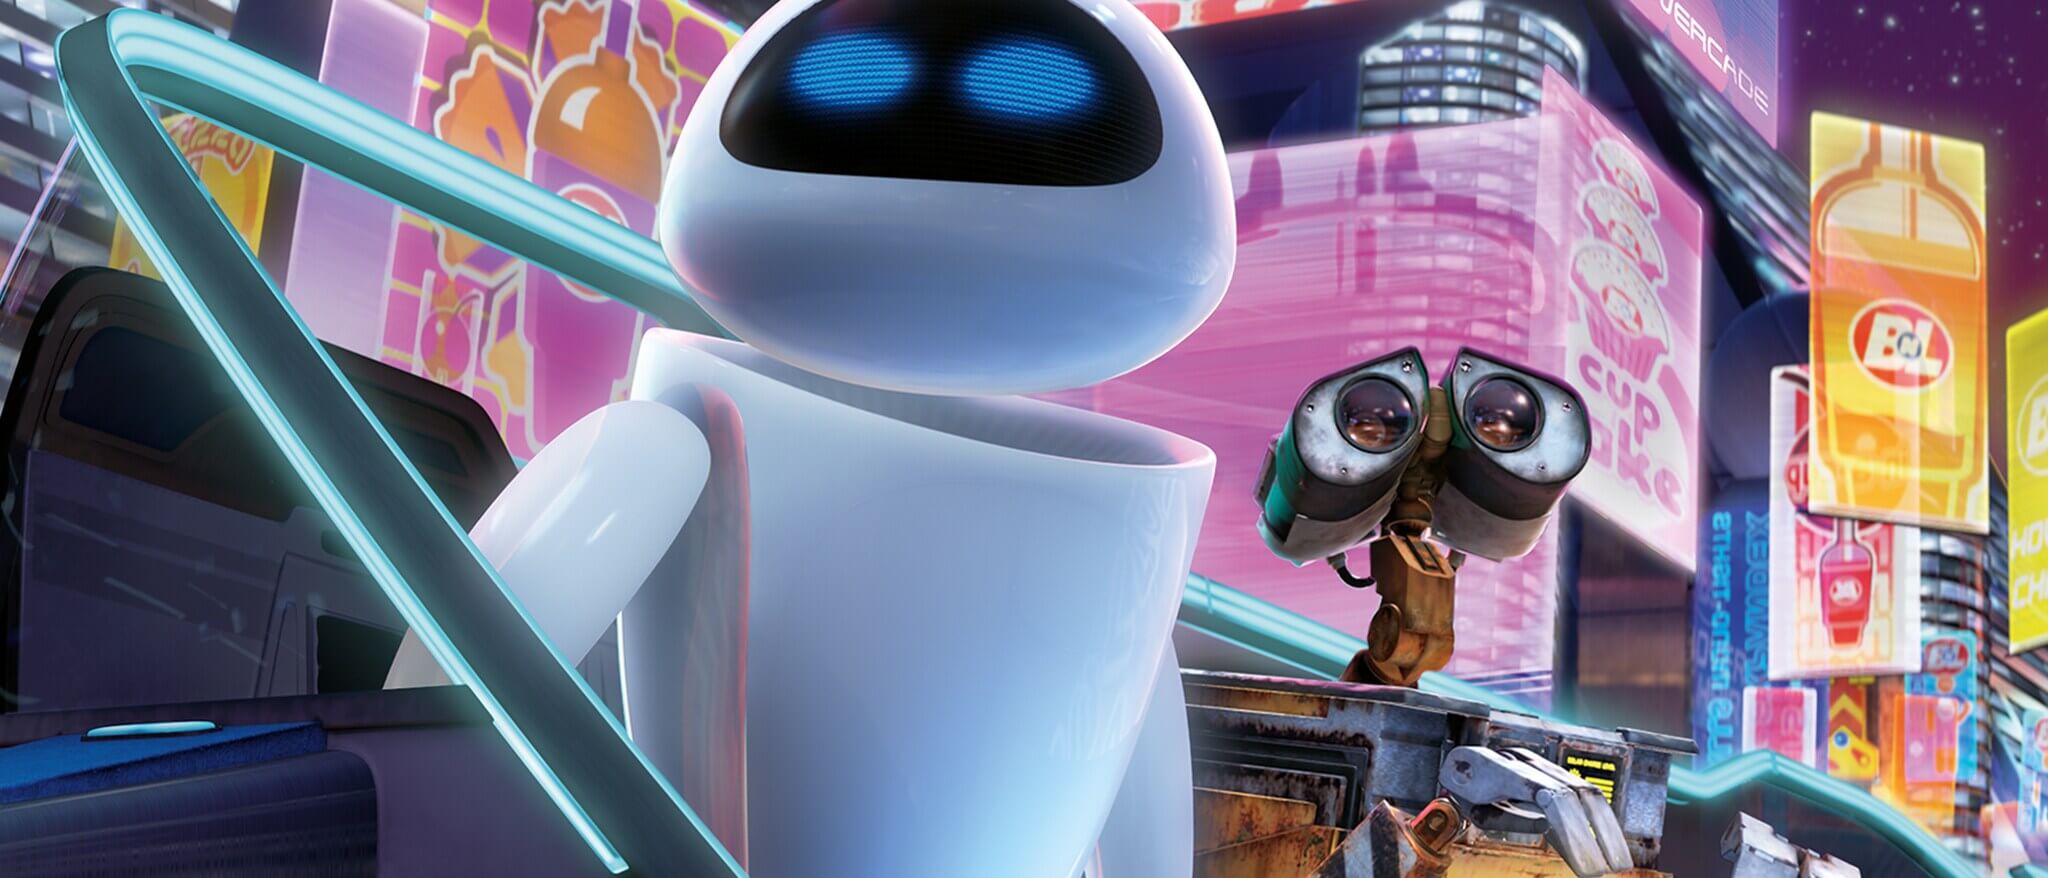 Watch Wall-E at Images Cinema